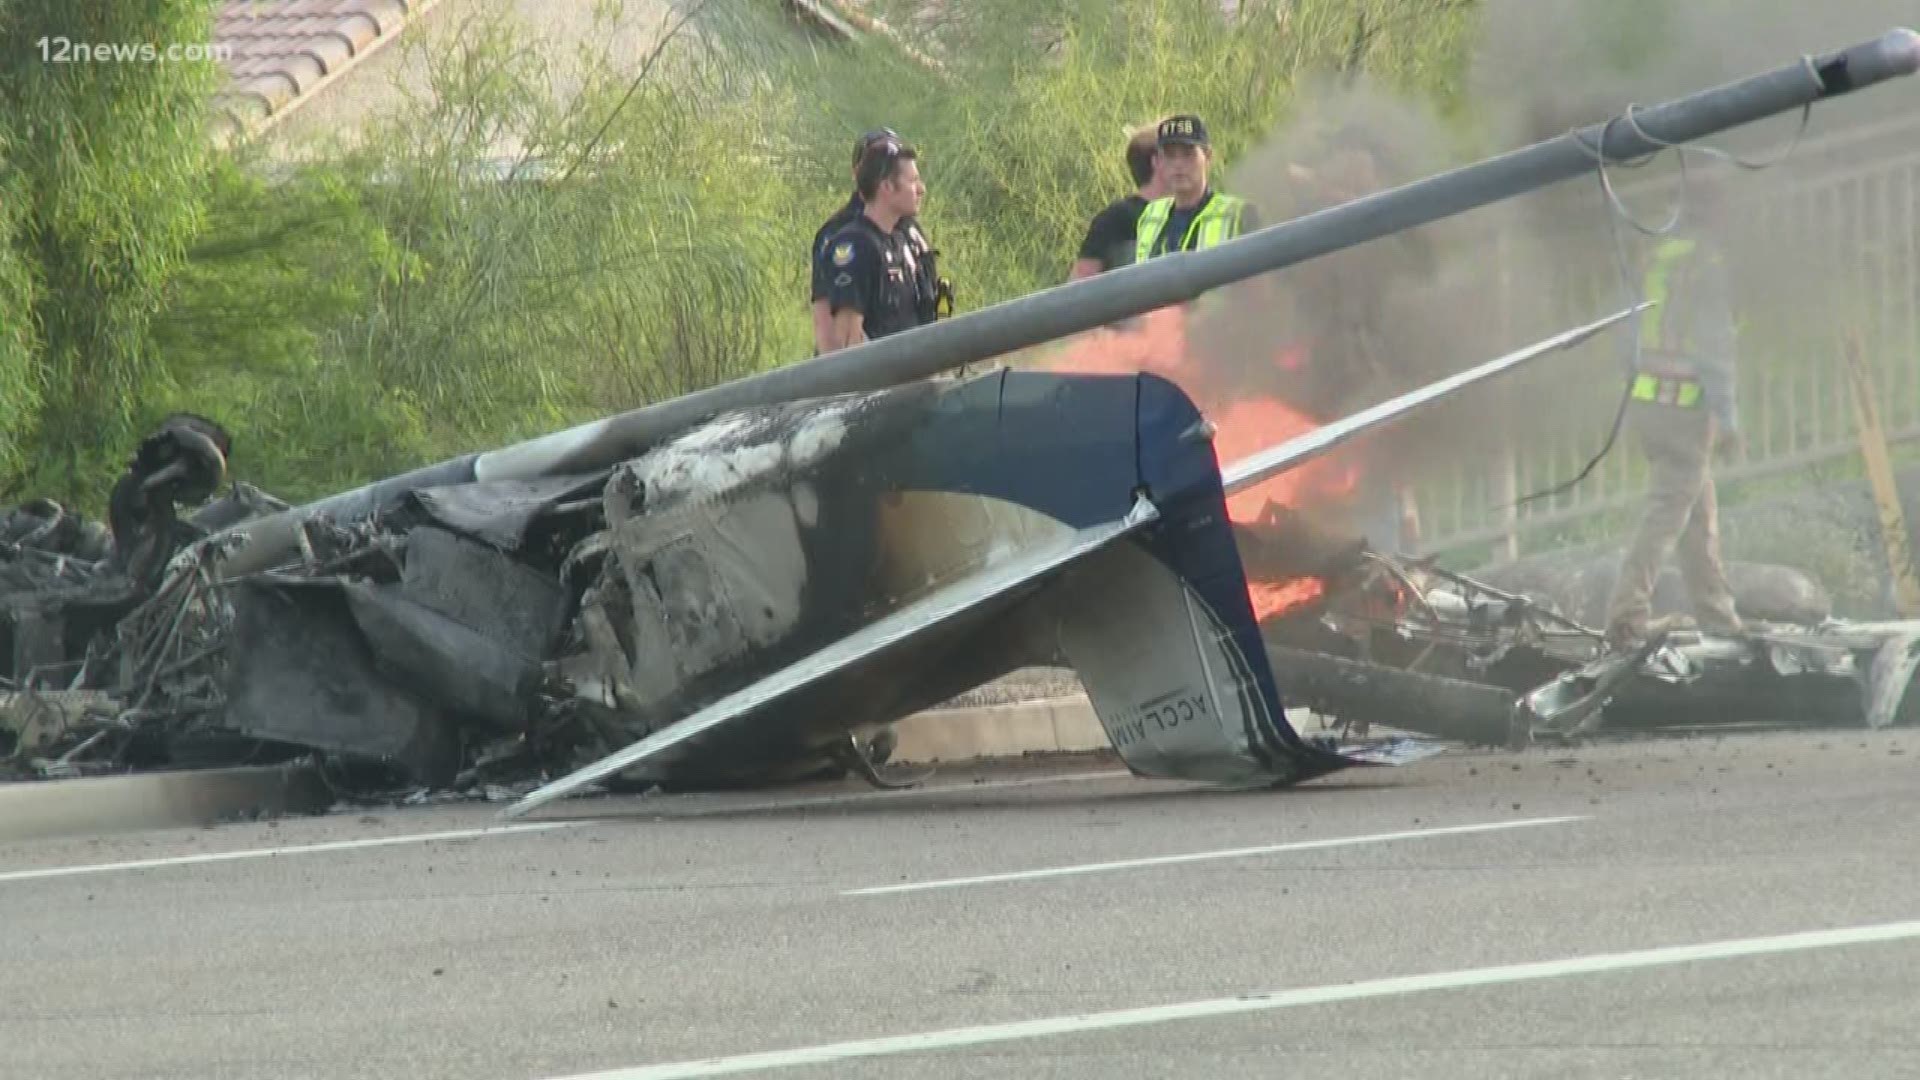 The man who helped save a pilot from a burning plane that crashed into the street at 31st Avenue and Deer Valley Road speaks about the split-second decision to save the man from the burning wreckage.